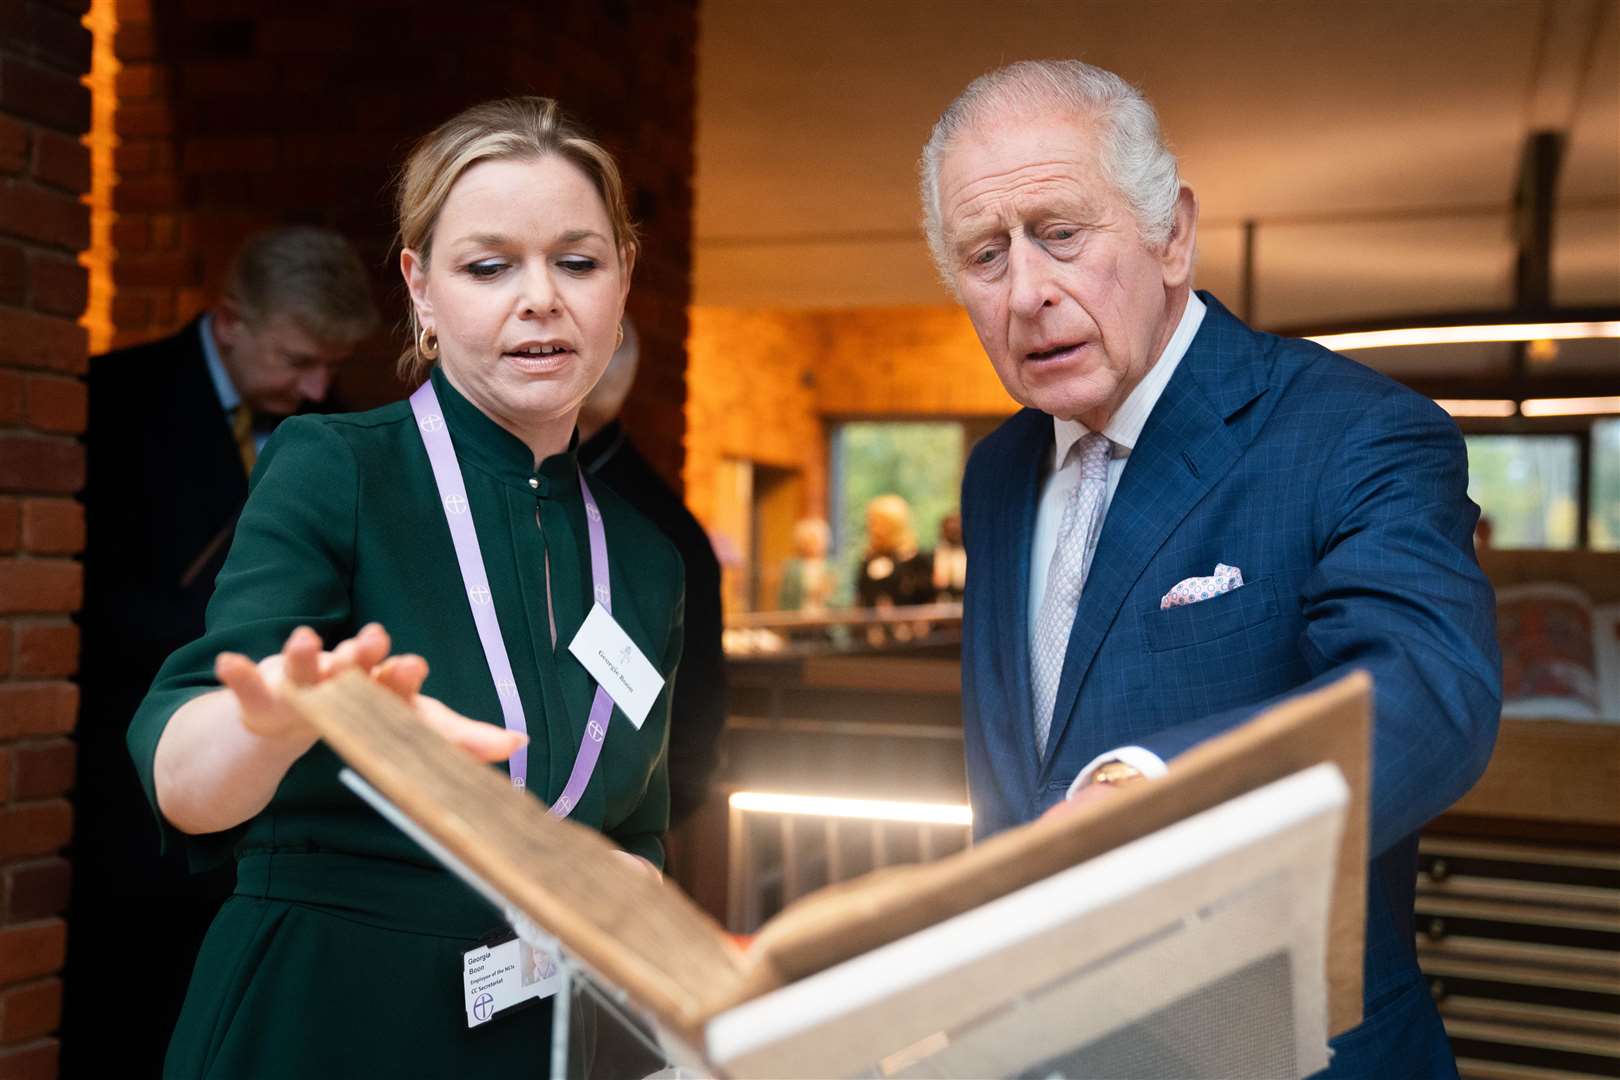 Charles looks at historic artefacts during a visit to Lambeth Palace Library (James Manning/PA)